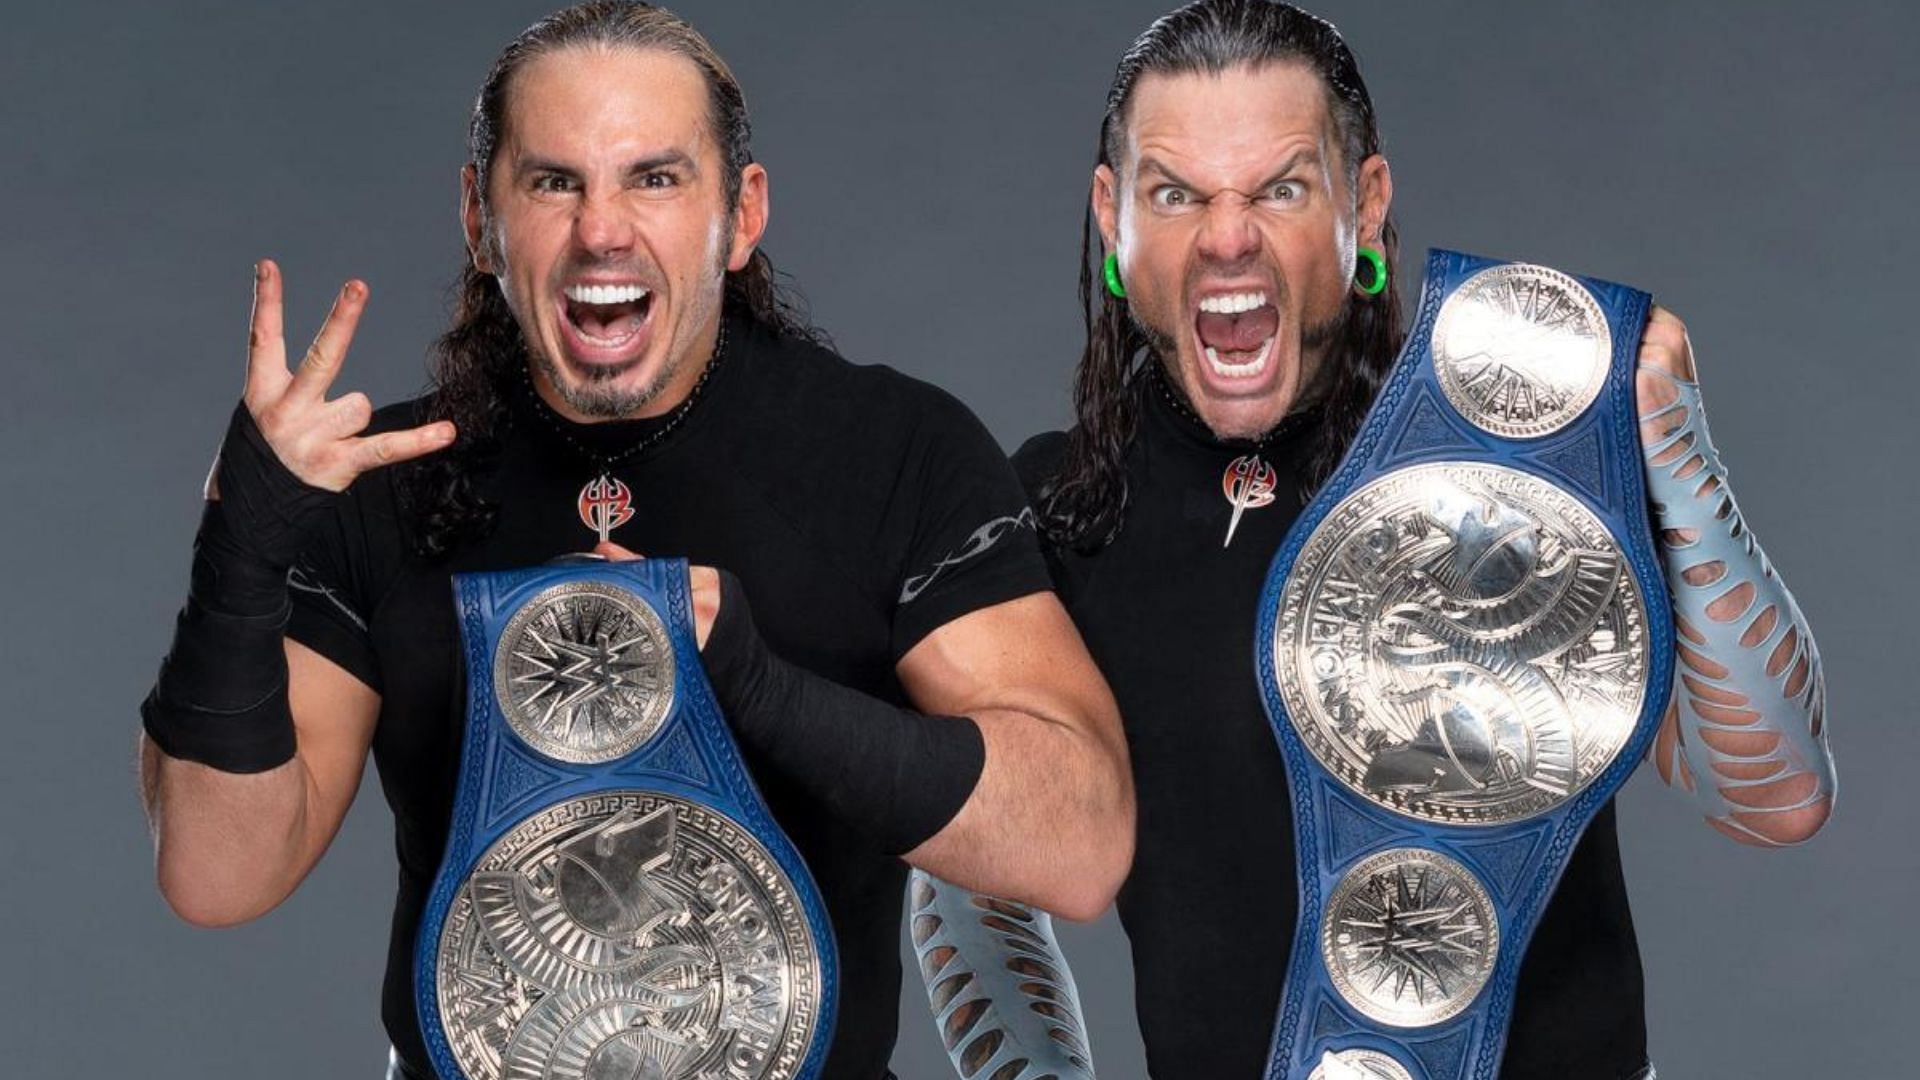 Which two WWE veterans gave The Hardys such a hardy time?